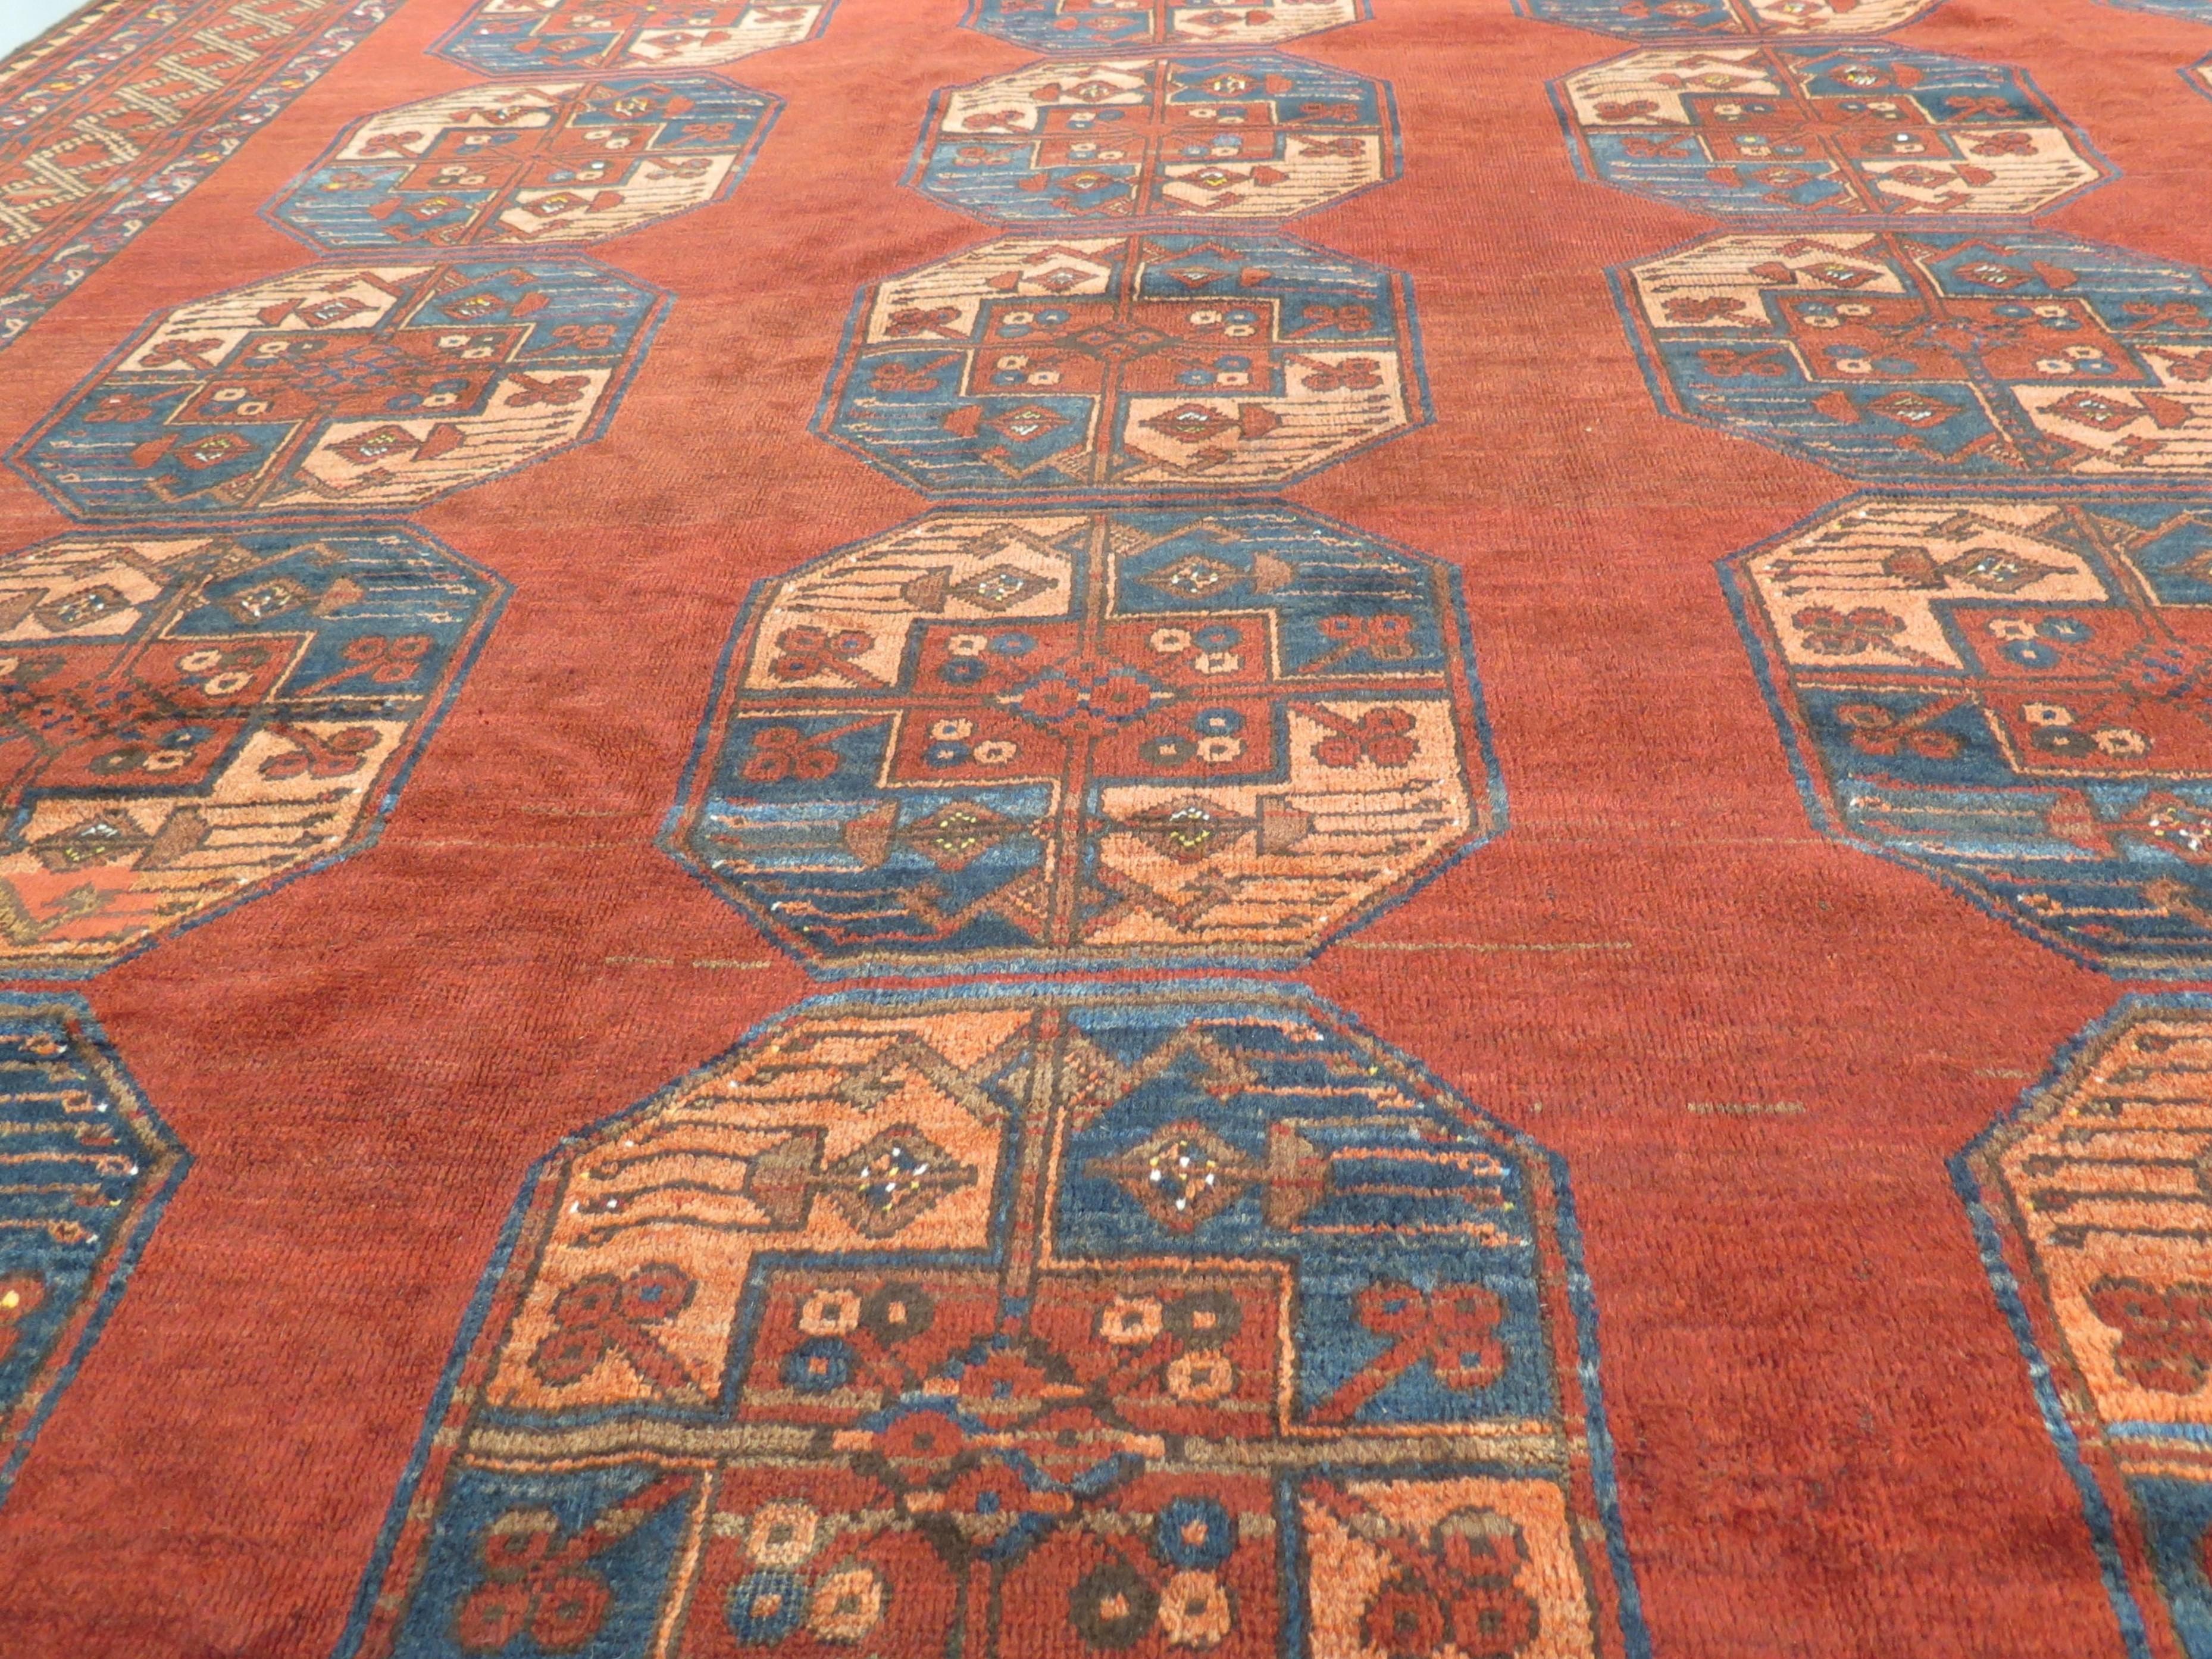 The Ersari tribe of Central Asia, residing in Southern Turkmenistan and Northern Afghanistan, have a long and rich history in the world of antique rugs. Their weavings are widely appreciated for their quality, rich palettes, and their distinctive